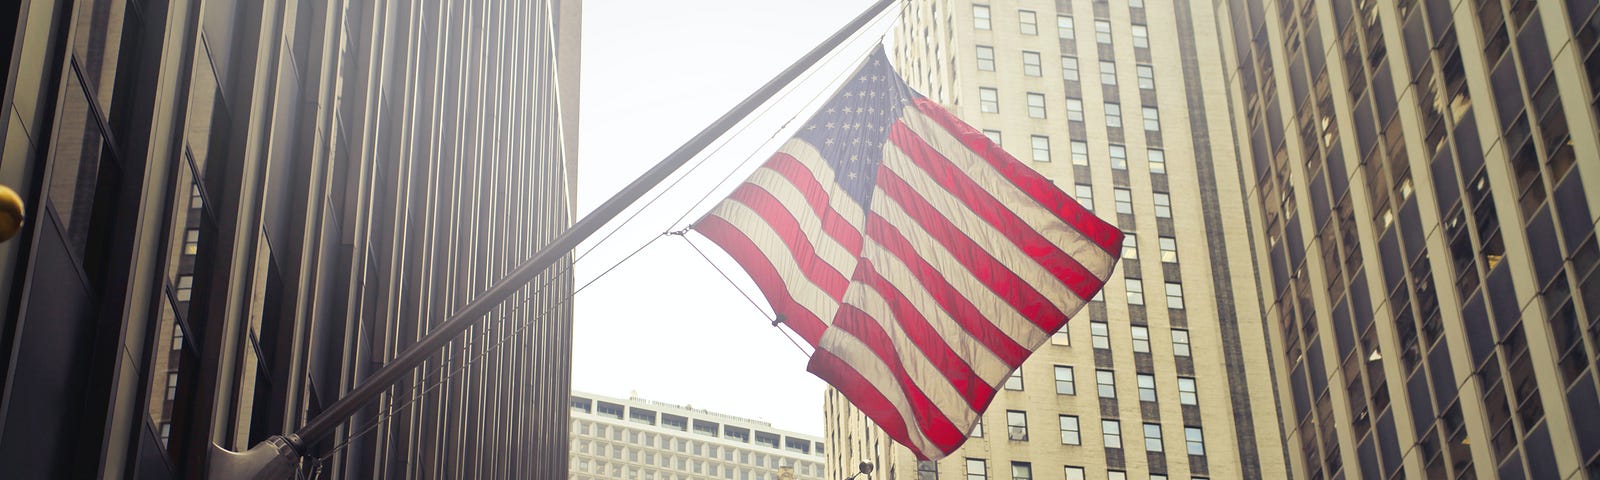 Two flags hang from poles coming off of large, corporate buildings.